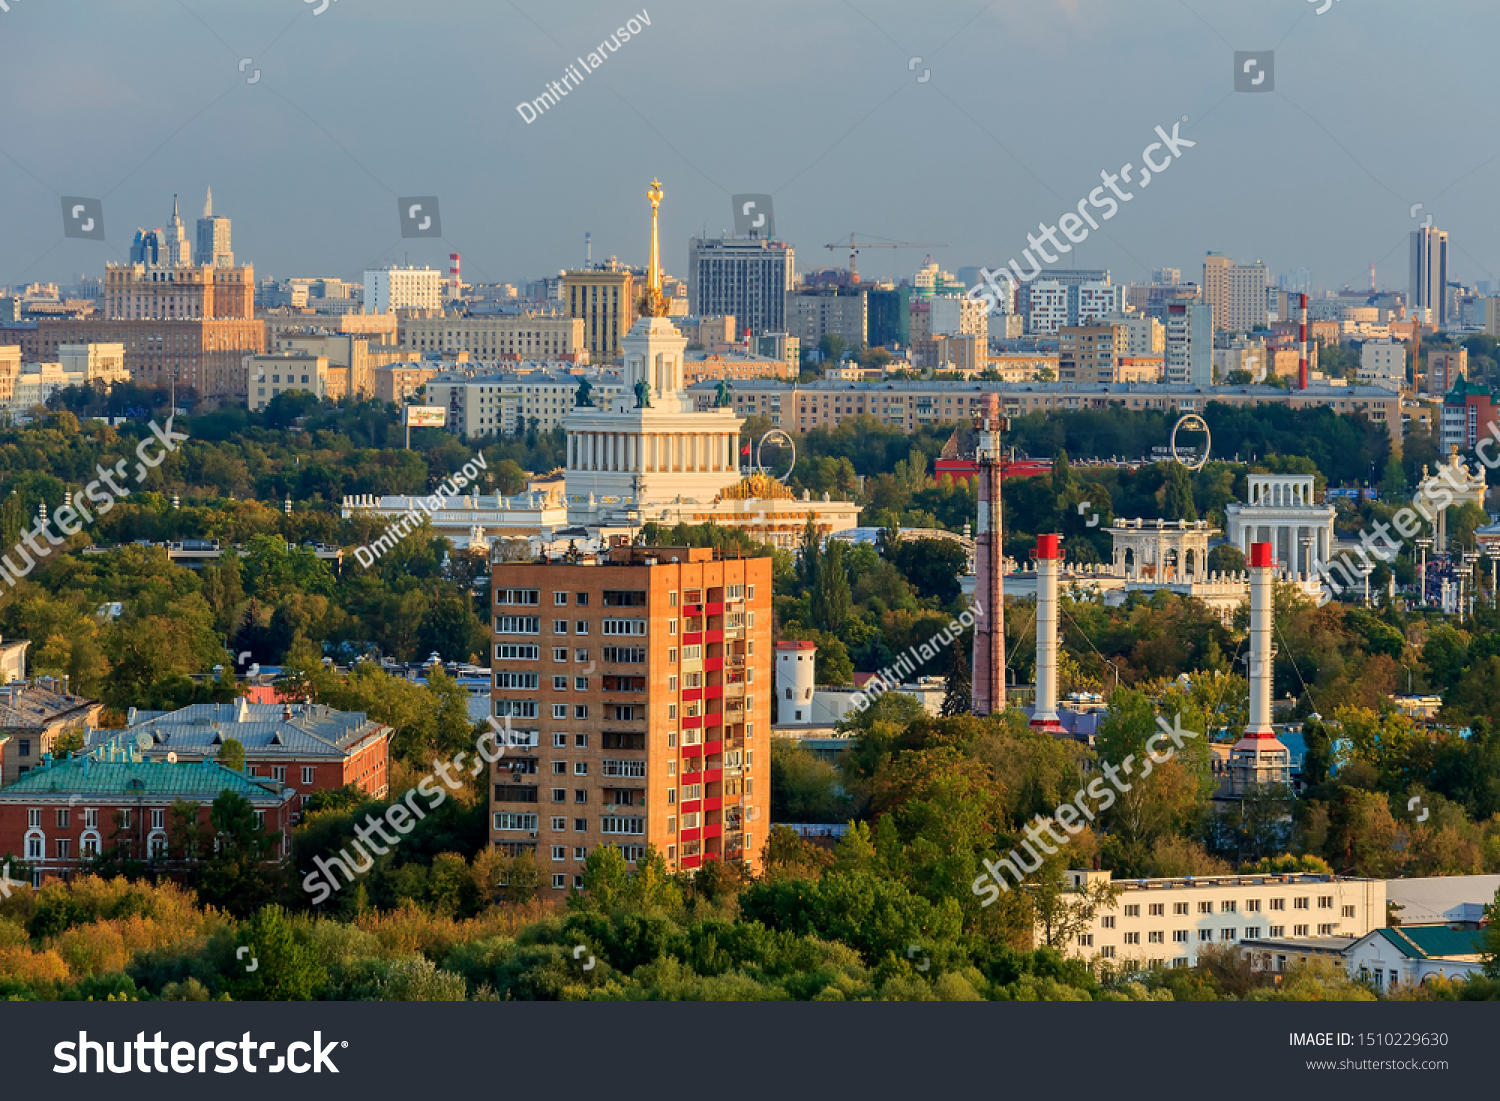 City landscape from above. Typical Moscow architect top view. Rostokino District is located on banks of Yauza River and borders with Yaroslavsky District, Sviblovo District and Ostankinsky District #1510229630